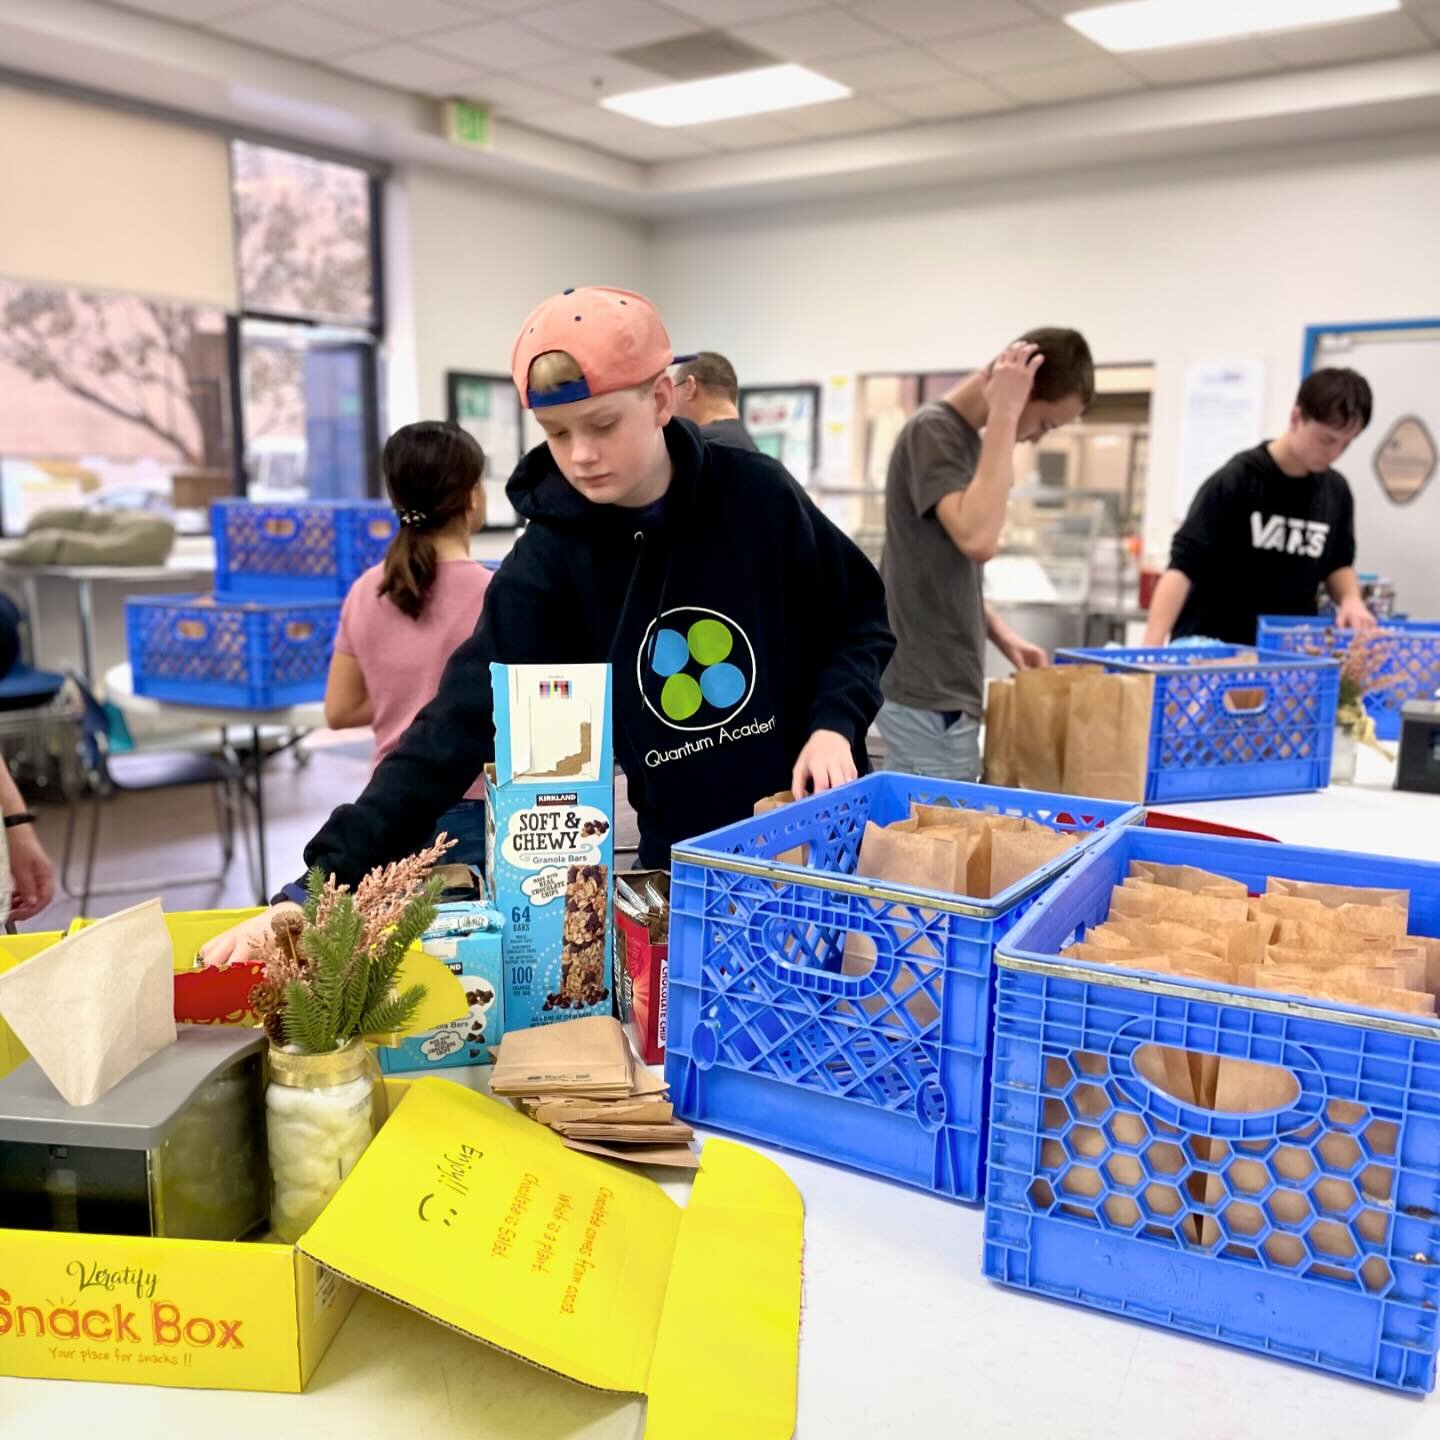 We wrapped up an epic Love Esco Month ❤️ by teaming up with our pals from @quantum_eusd to make sandwiches and pack up 200 lunches for our neighbors in need at @interfaithcs! 🌟💙🥪💚